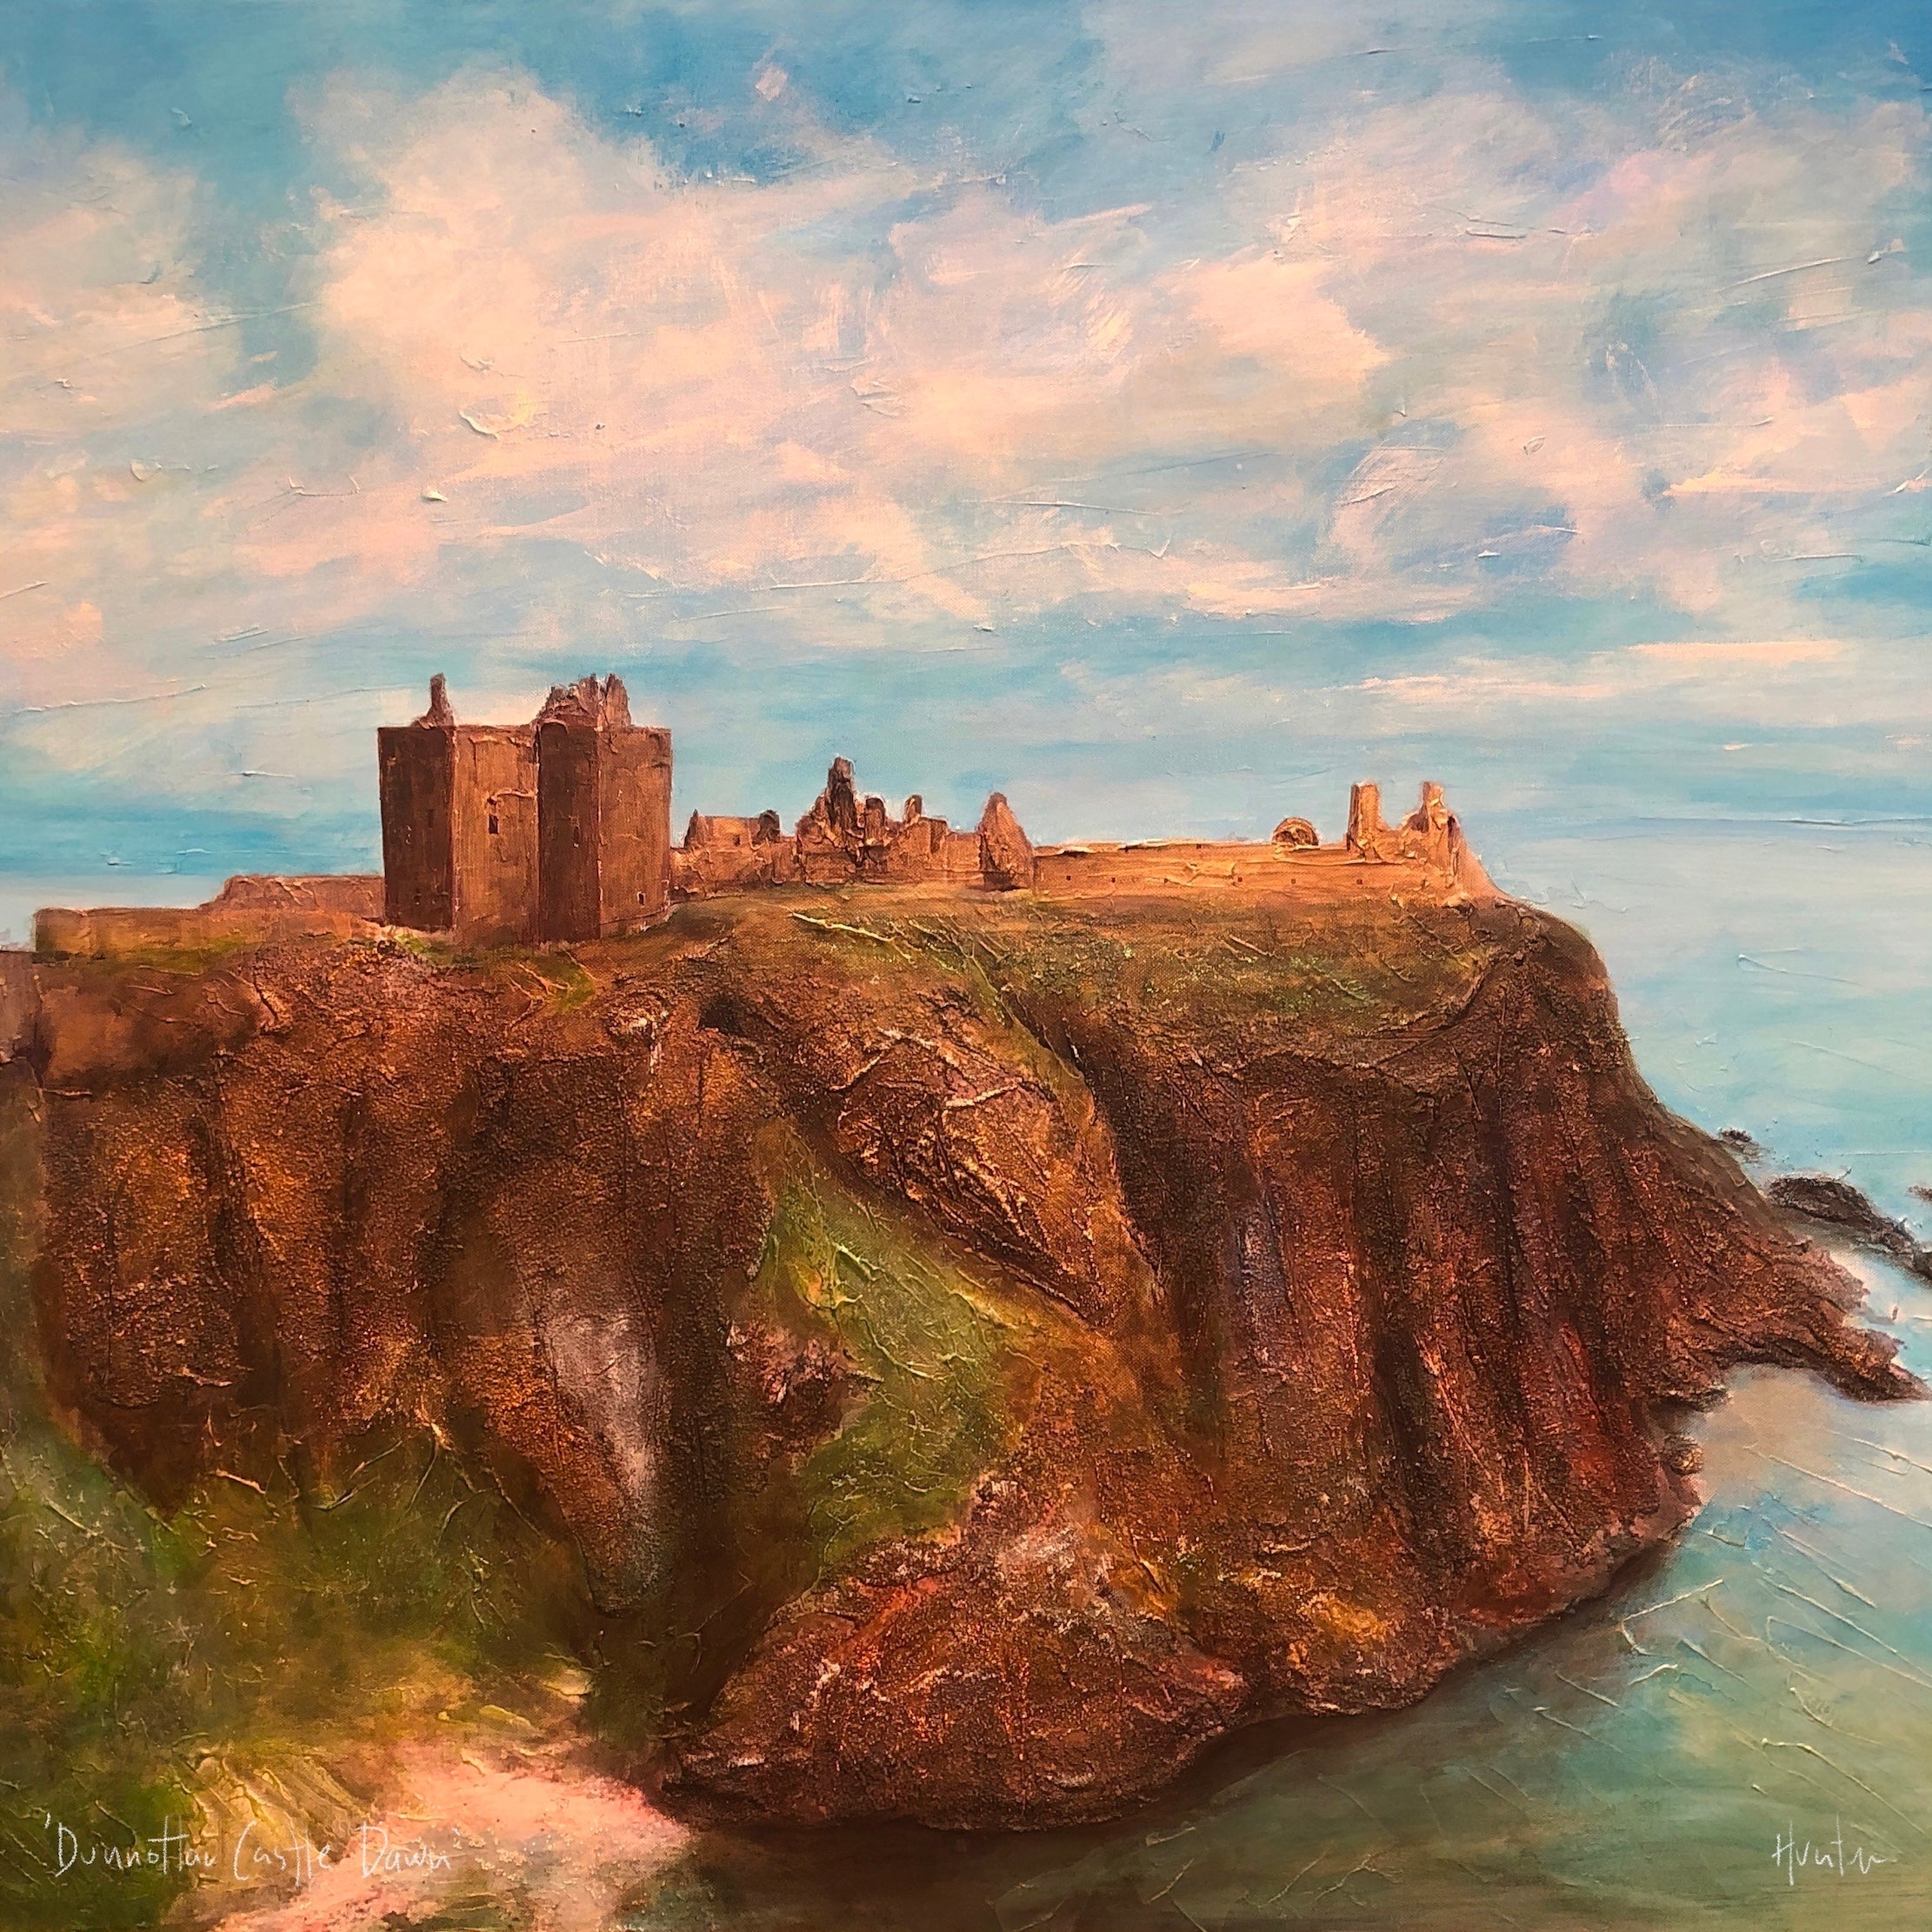 Dunnottar Castle | Scotland In Your Pocket Art Print-Scotland In Your Pocket Framed Prints-Historic & Iconic Scotland Art Gallery-Mounted & Cello Bag: 12.5x12.5 cm-Black Frame-Paintings, Prints, Homeware, Art Gifts From Scotland By Scottish Artist Kevin Hunter